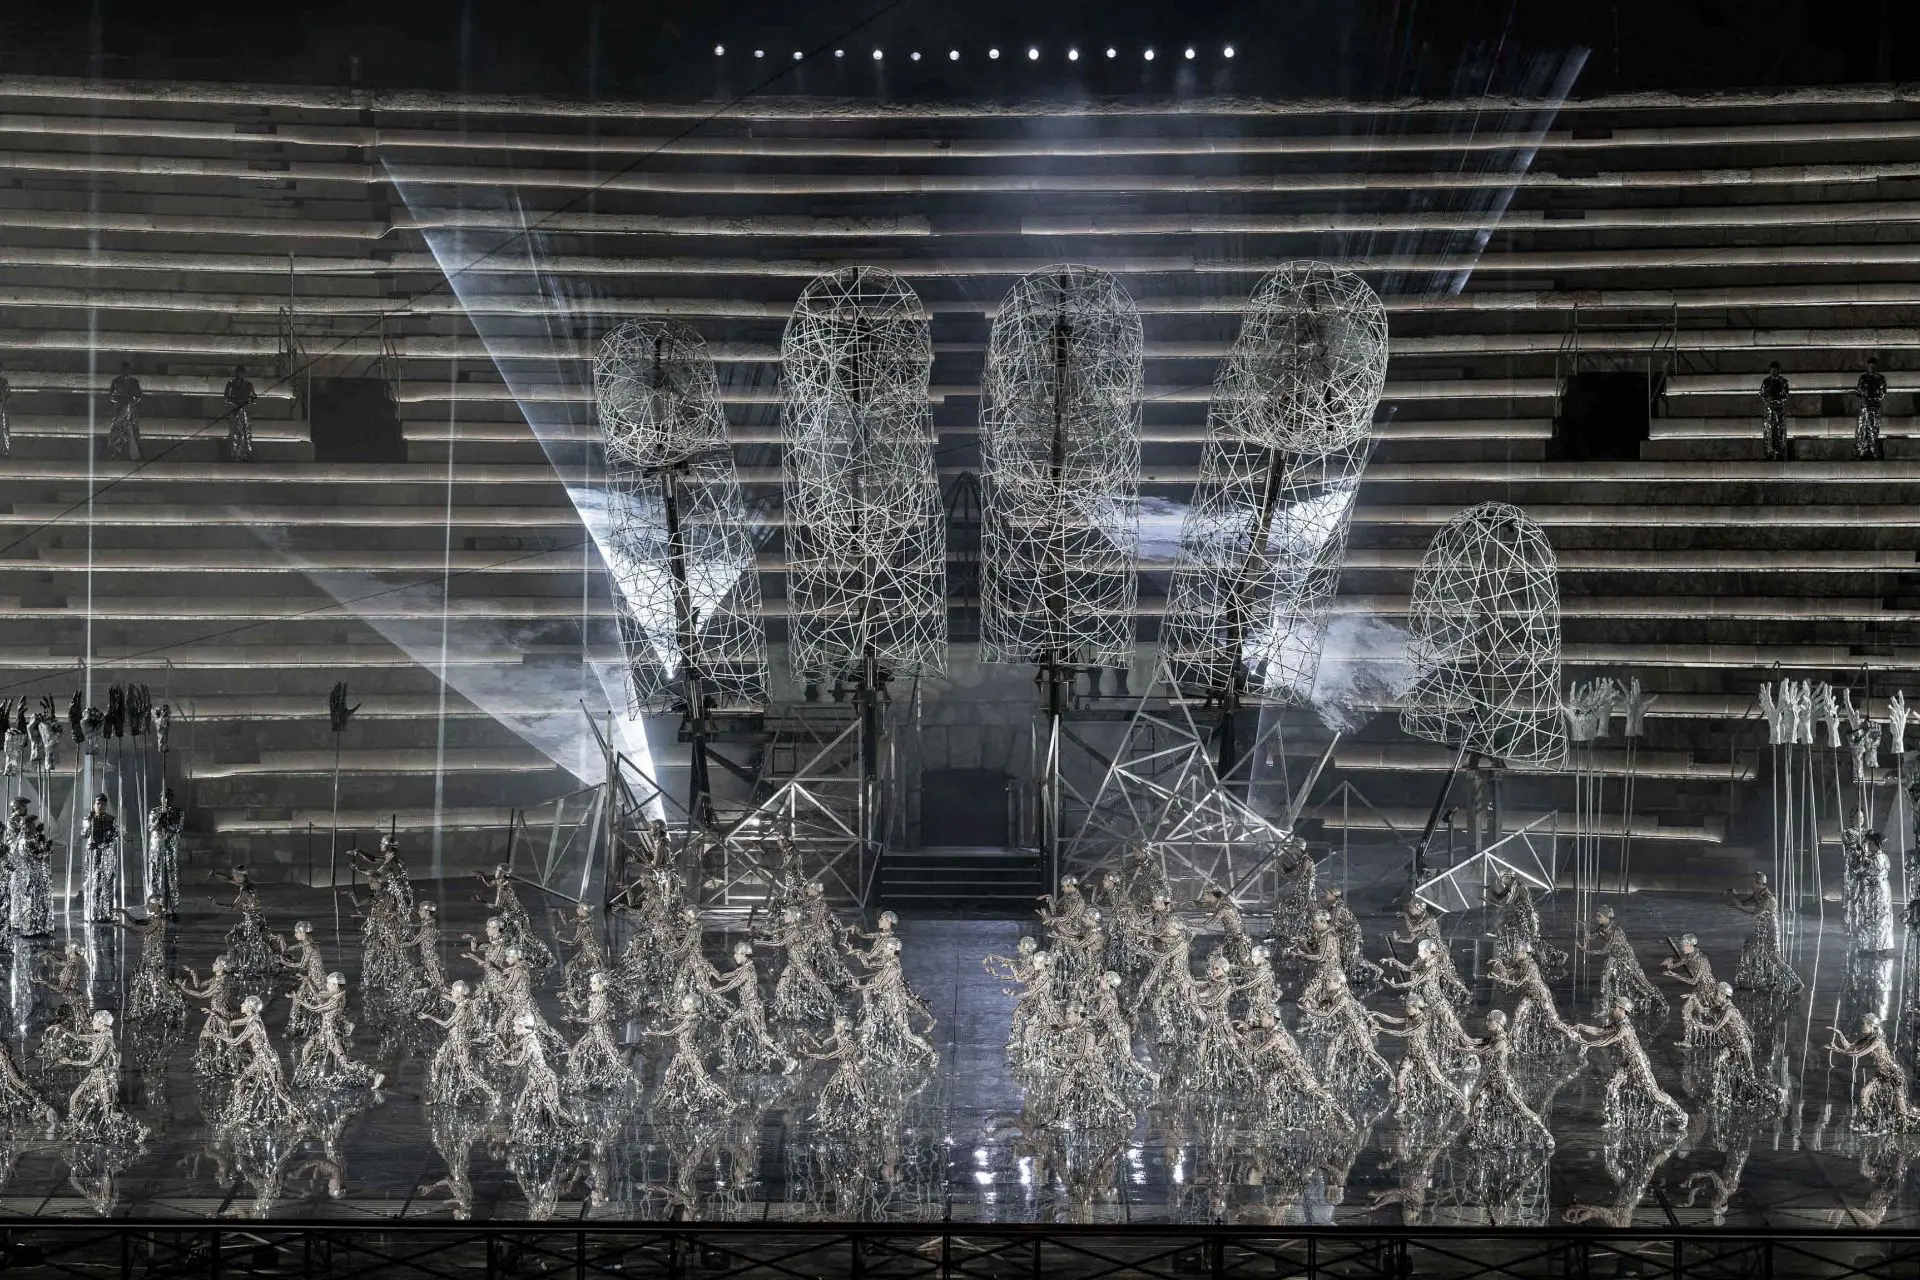 The stage is again dominated by the large hand, illuminated by beams of white light and surrounded by dense clouds of smoke. At the back of the stage, the spears with white hands can be seen to the right while the spears with the black hands are to the left. They are all made of papier-mâché. In front of the large hand, male and female dancers occupy the entire stage. They are standing and facing the right with both their right leg and their arms extending forwards. They are wearing tight beige colored suits decorated with designs of black hieroglyphs. On top of their suits, they are wearing sparkling silver netting accented with crystals with silver caps on their heads. 